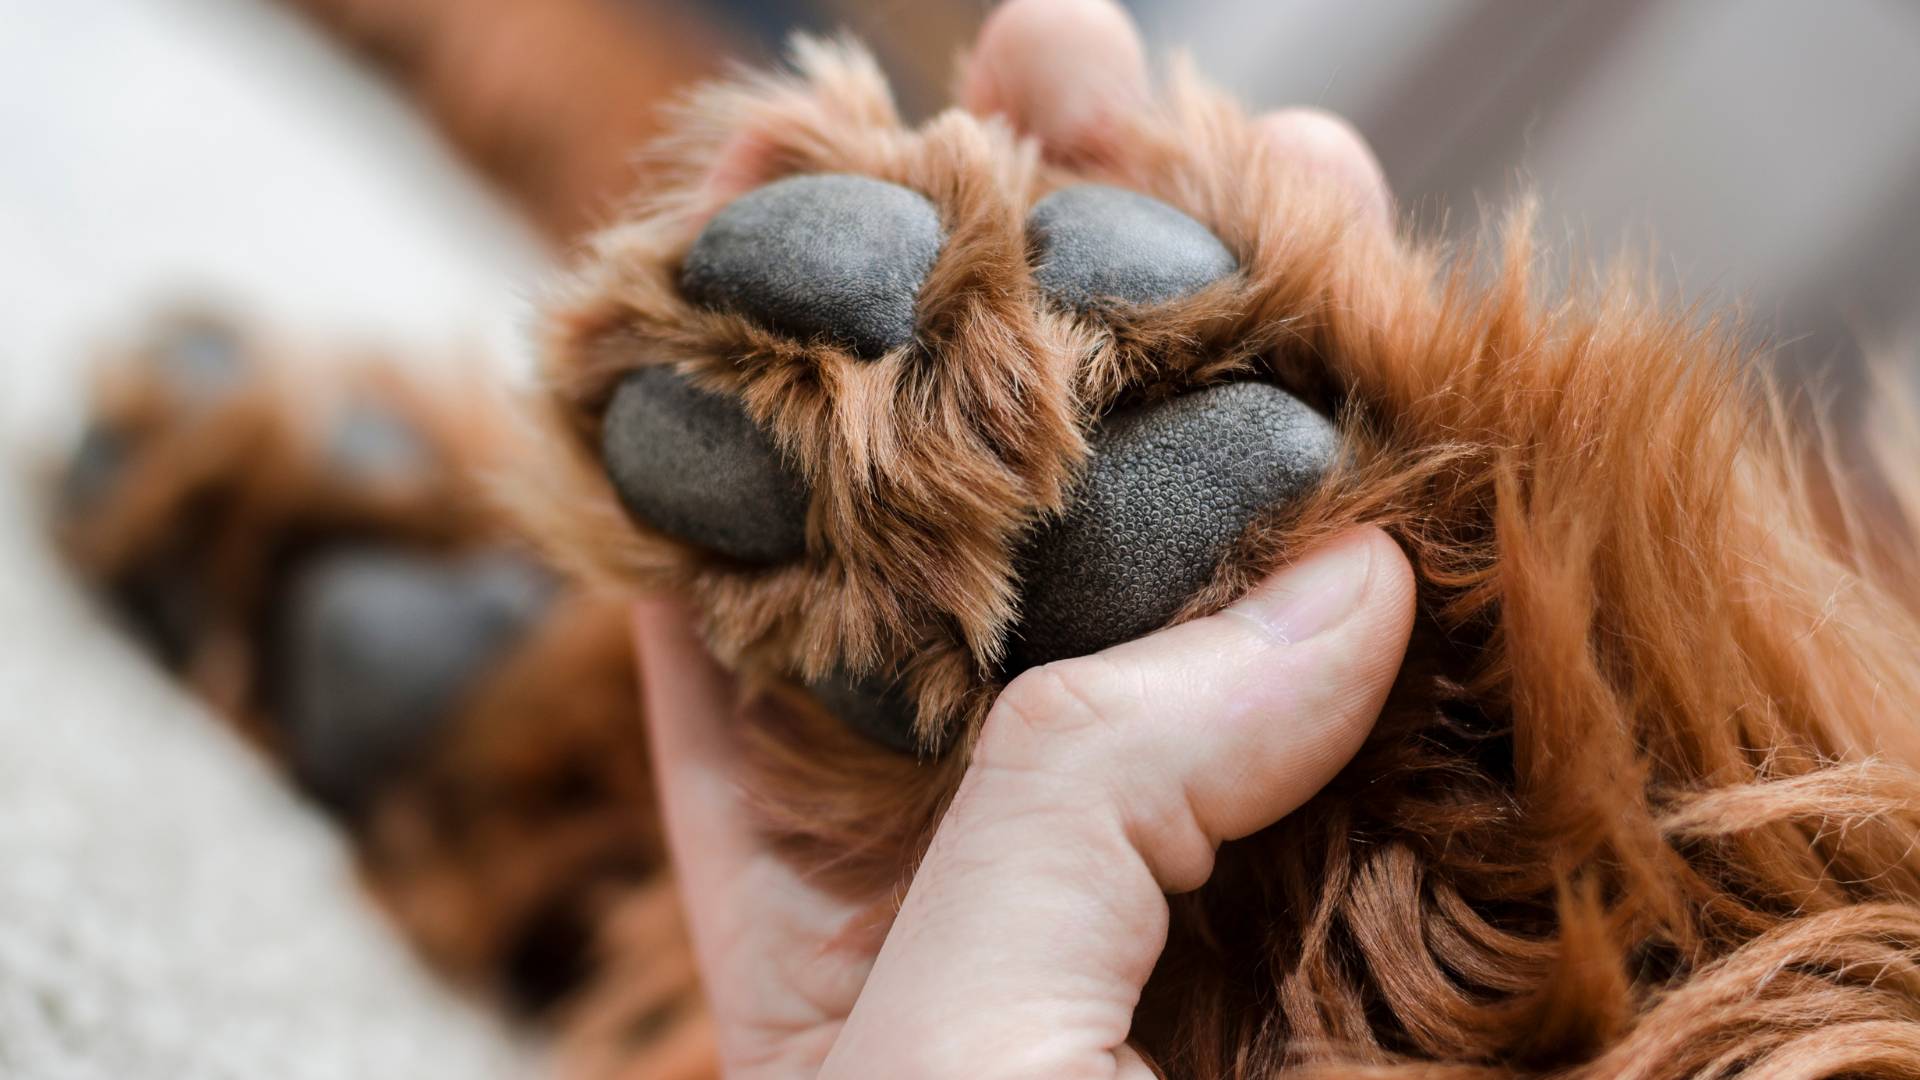 Protect your dog's paws from winter weather